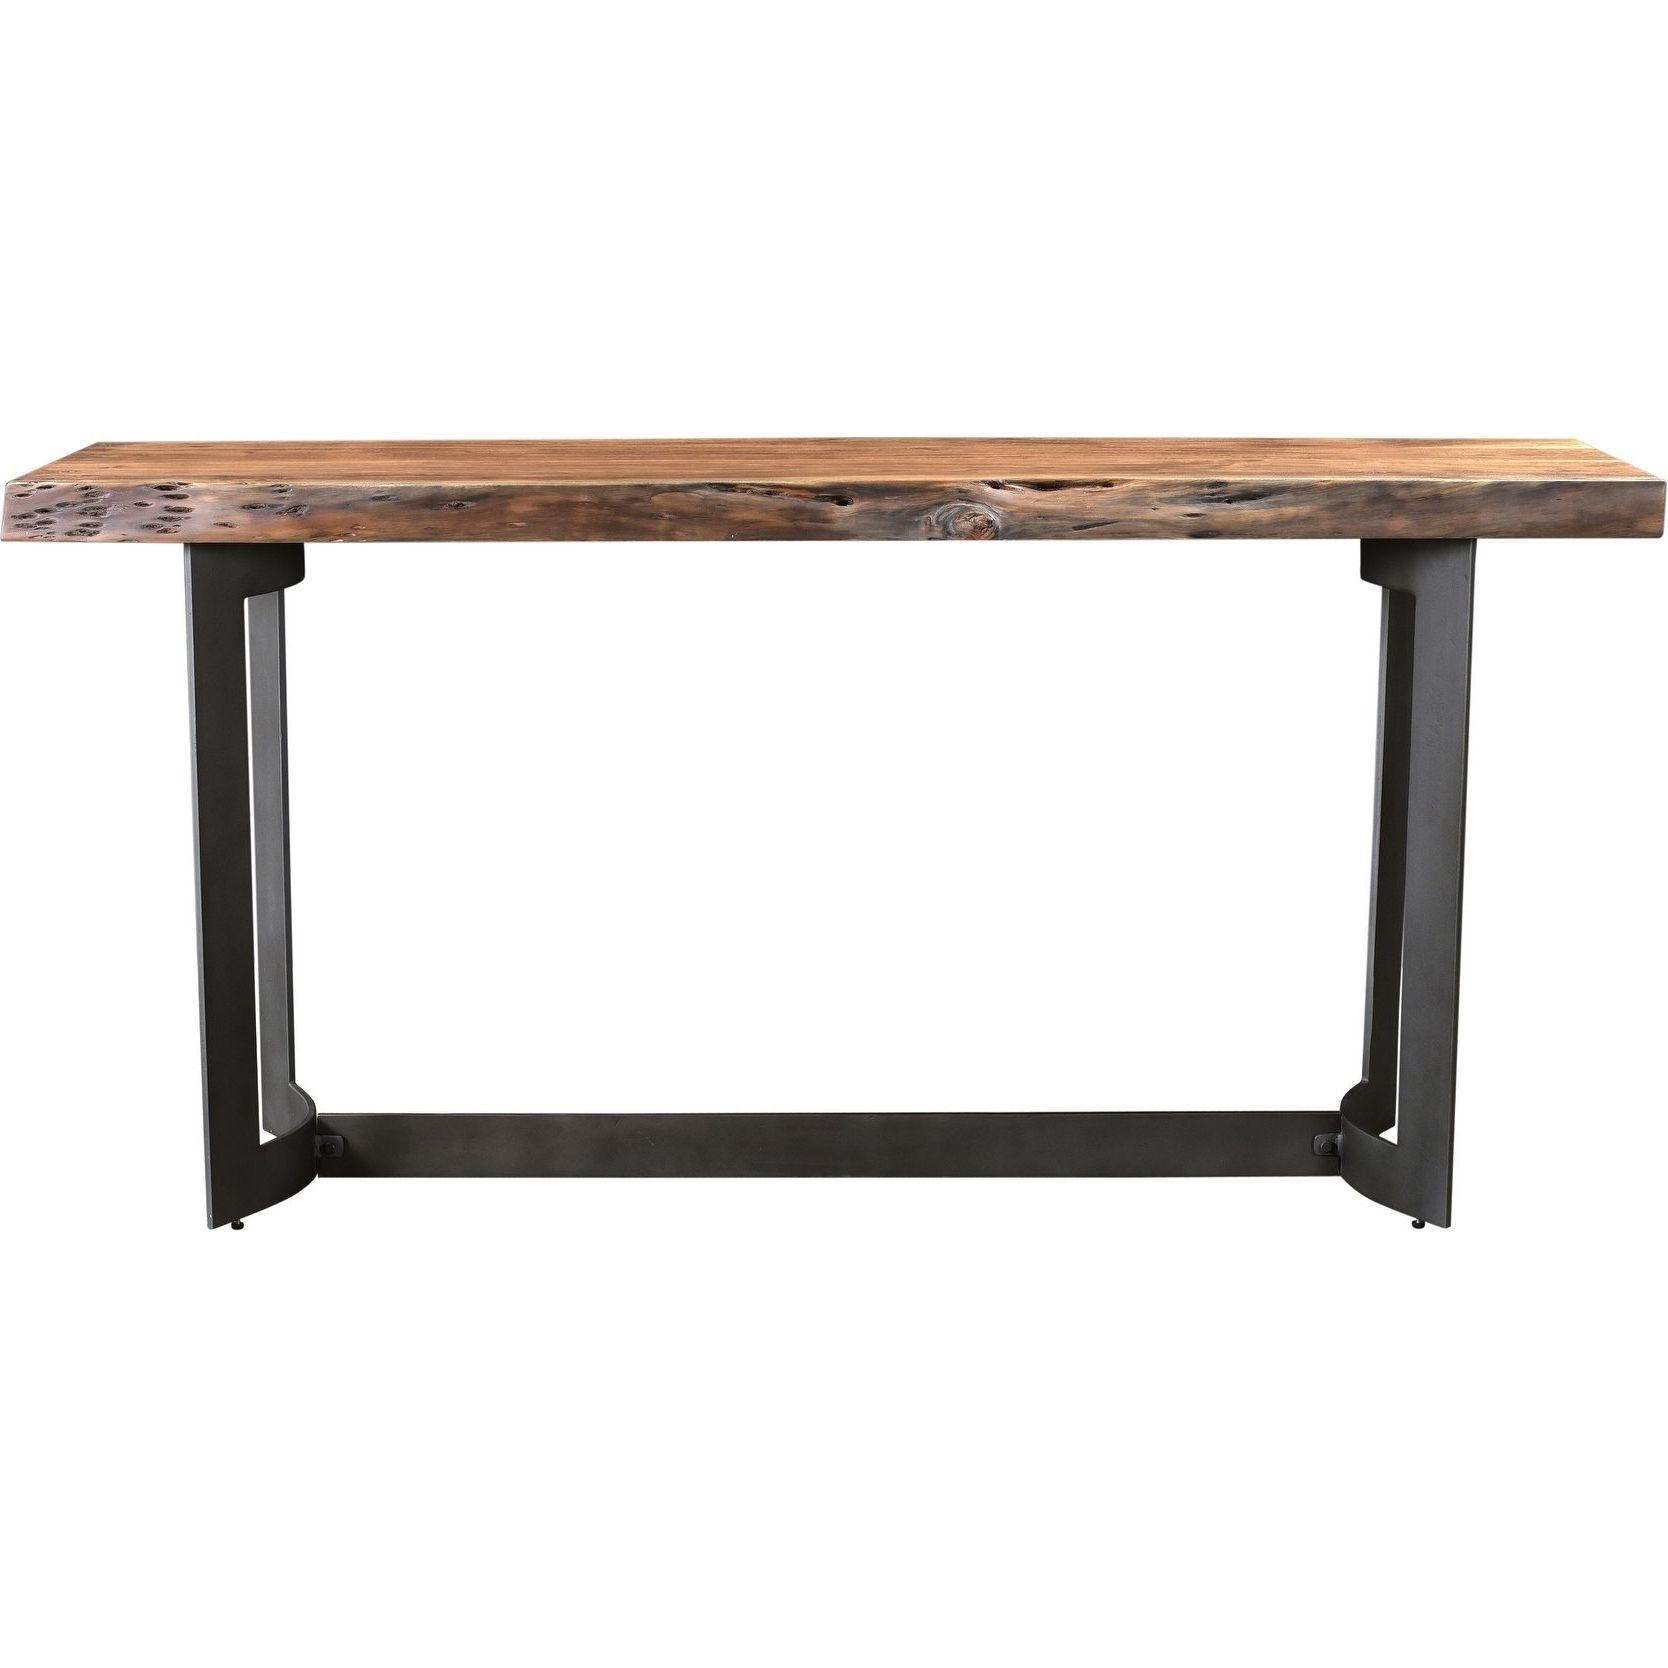 Shop Brown Live Edge Acacia Wood Rustic Smoked Console Table – On In 2017 Yukon Natural Console Tables (View 13 of 20)